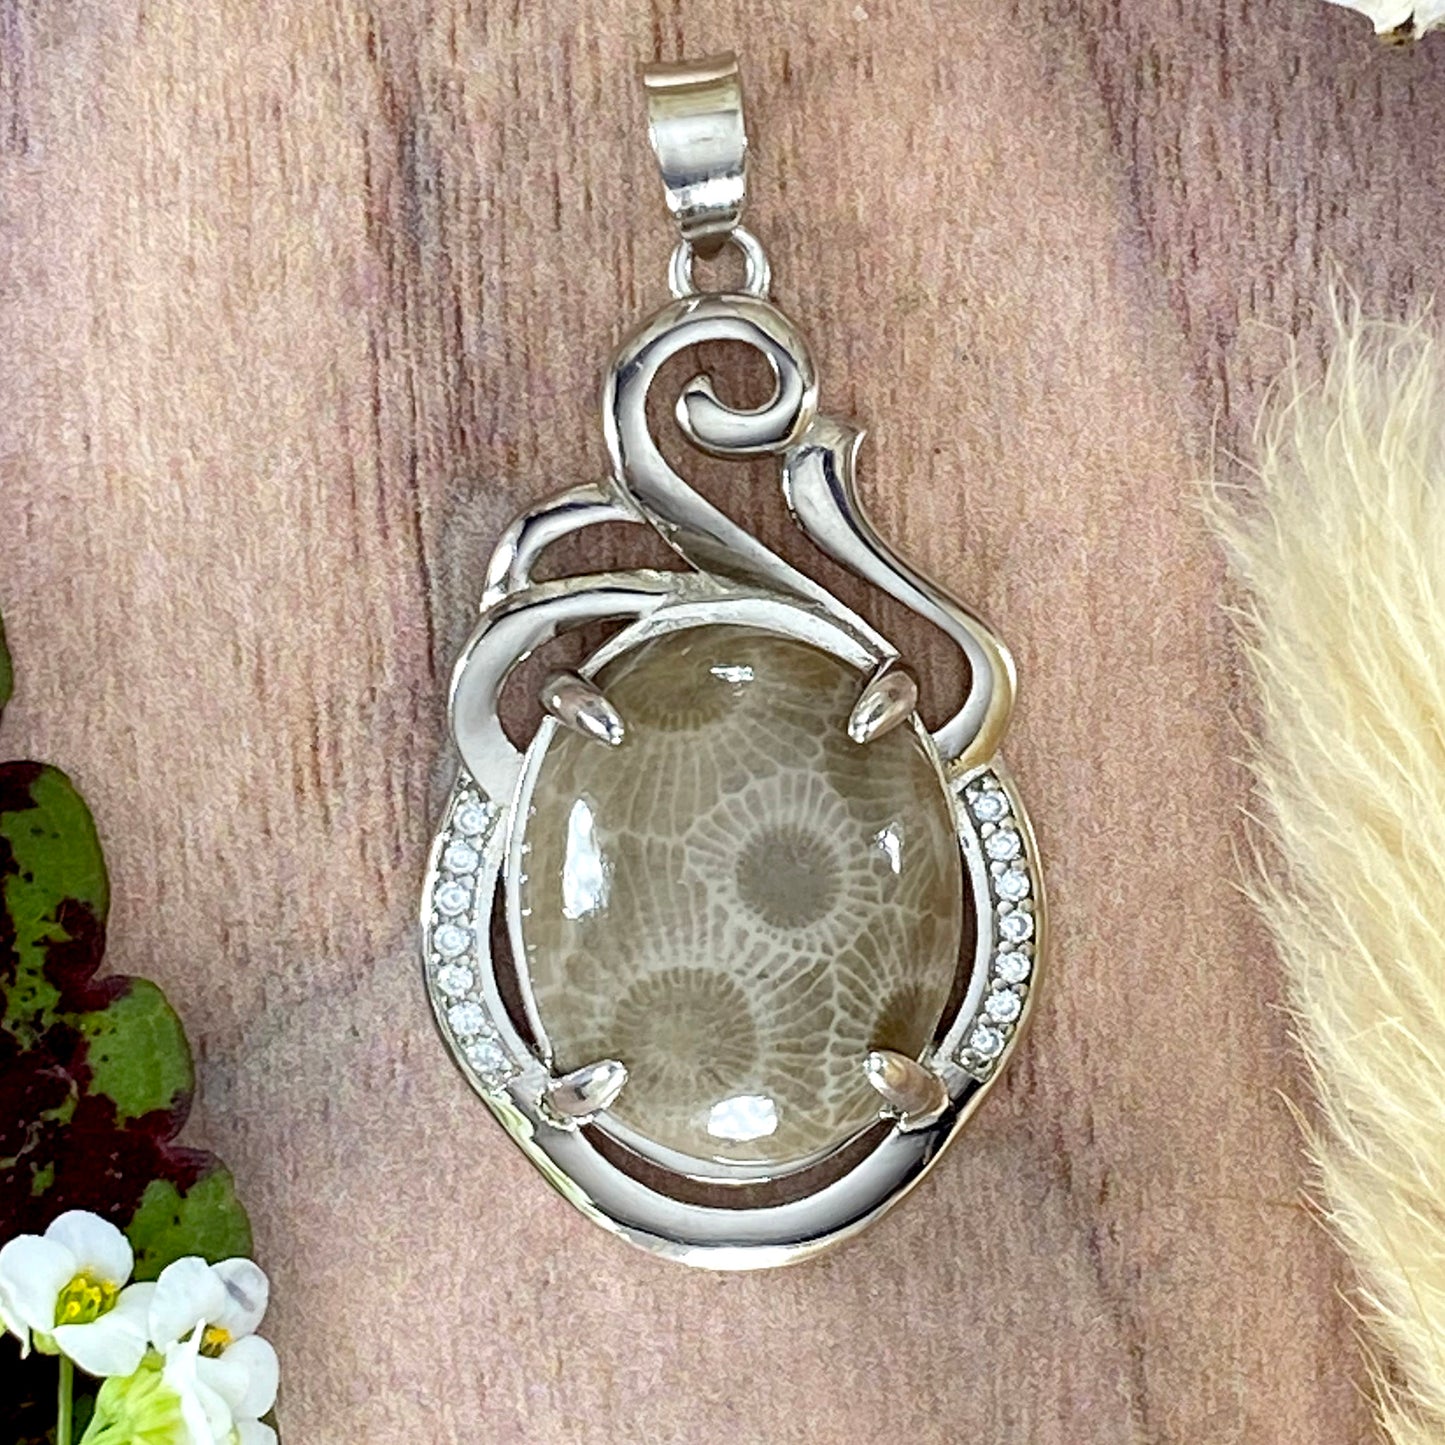 Petoskey Stone Pendant Necklace Front View VI - Stone Treasures by the Lake